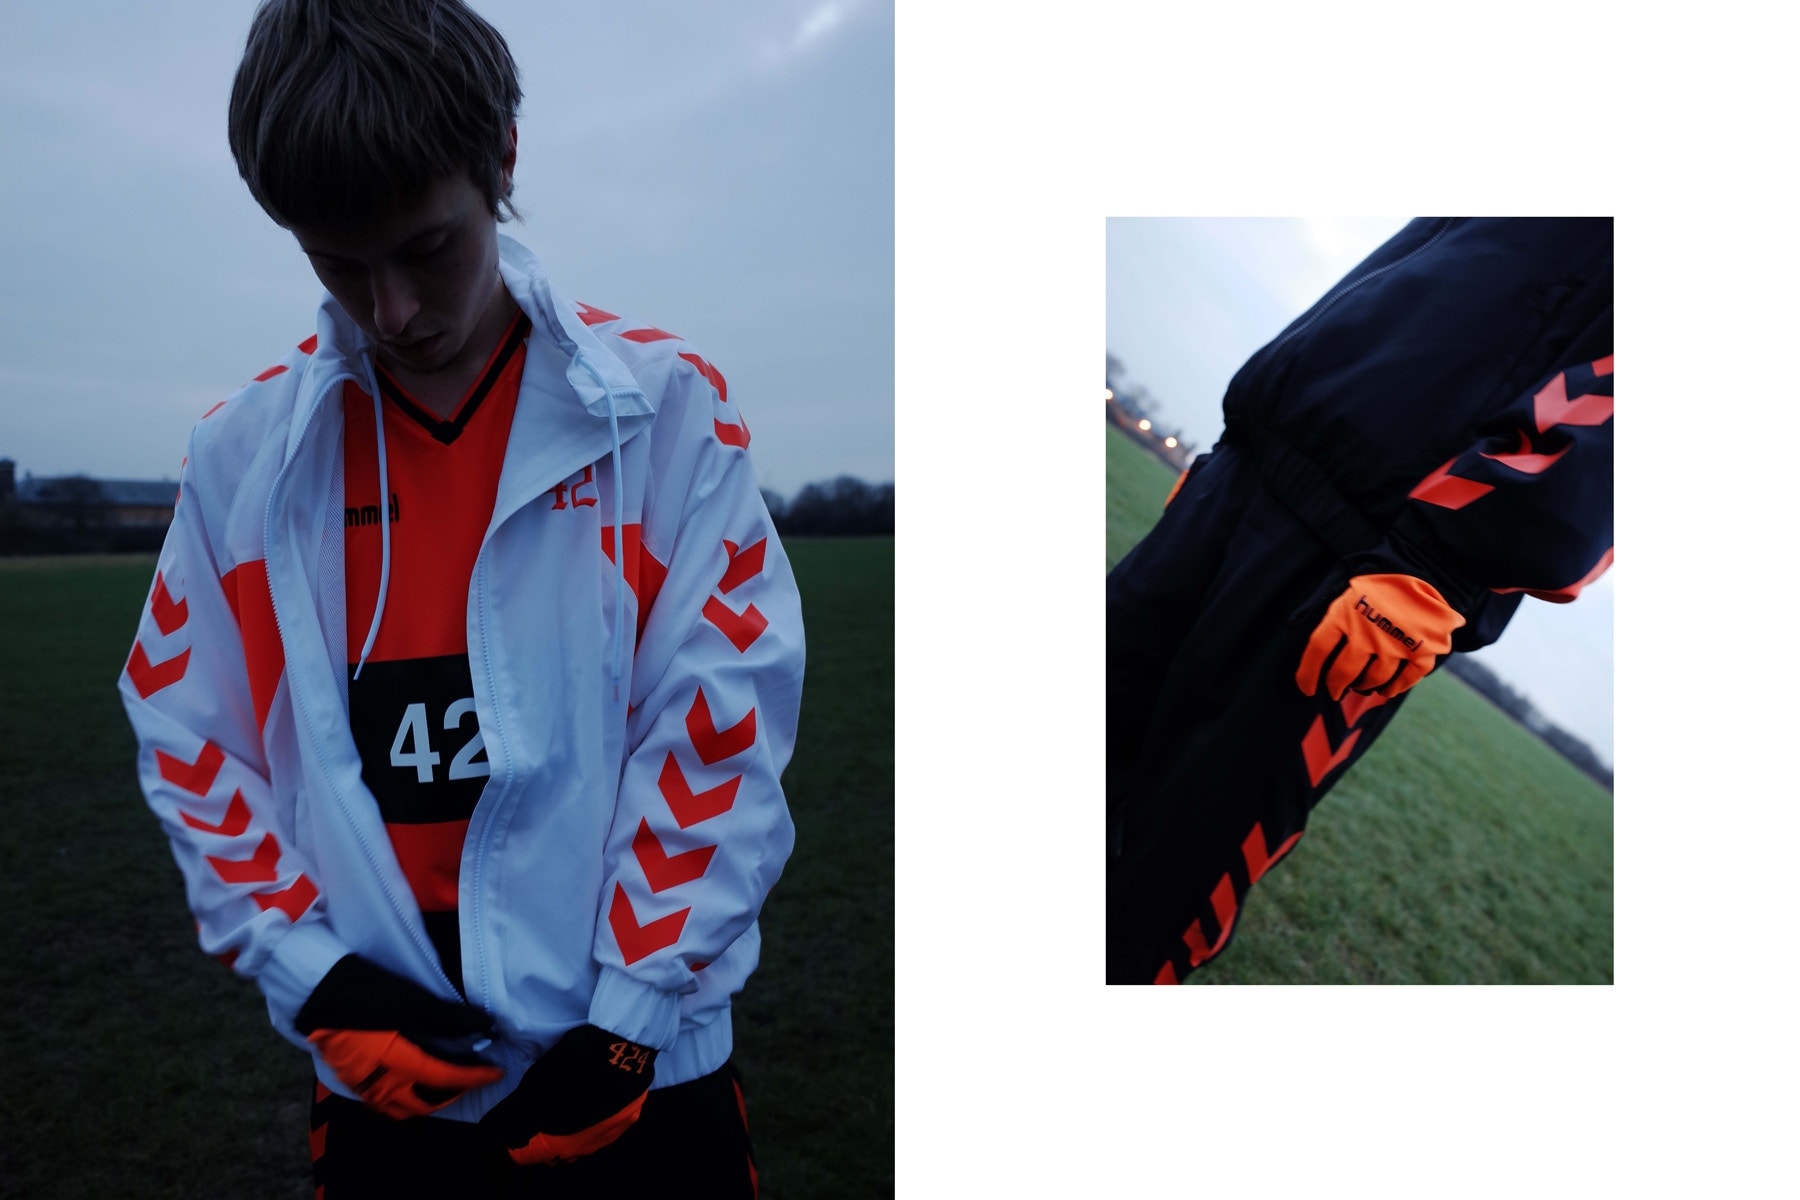 Hummel 424 Football Collection Capsule